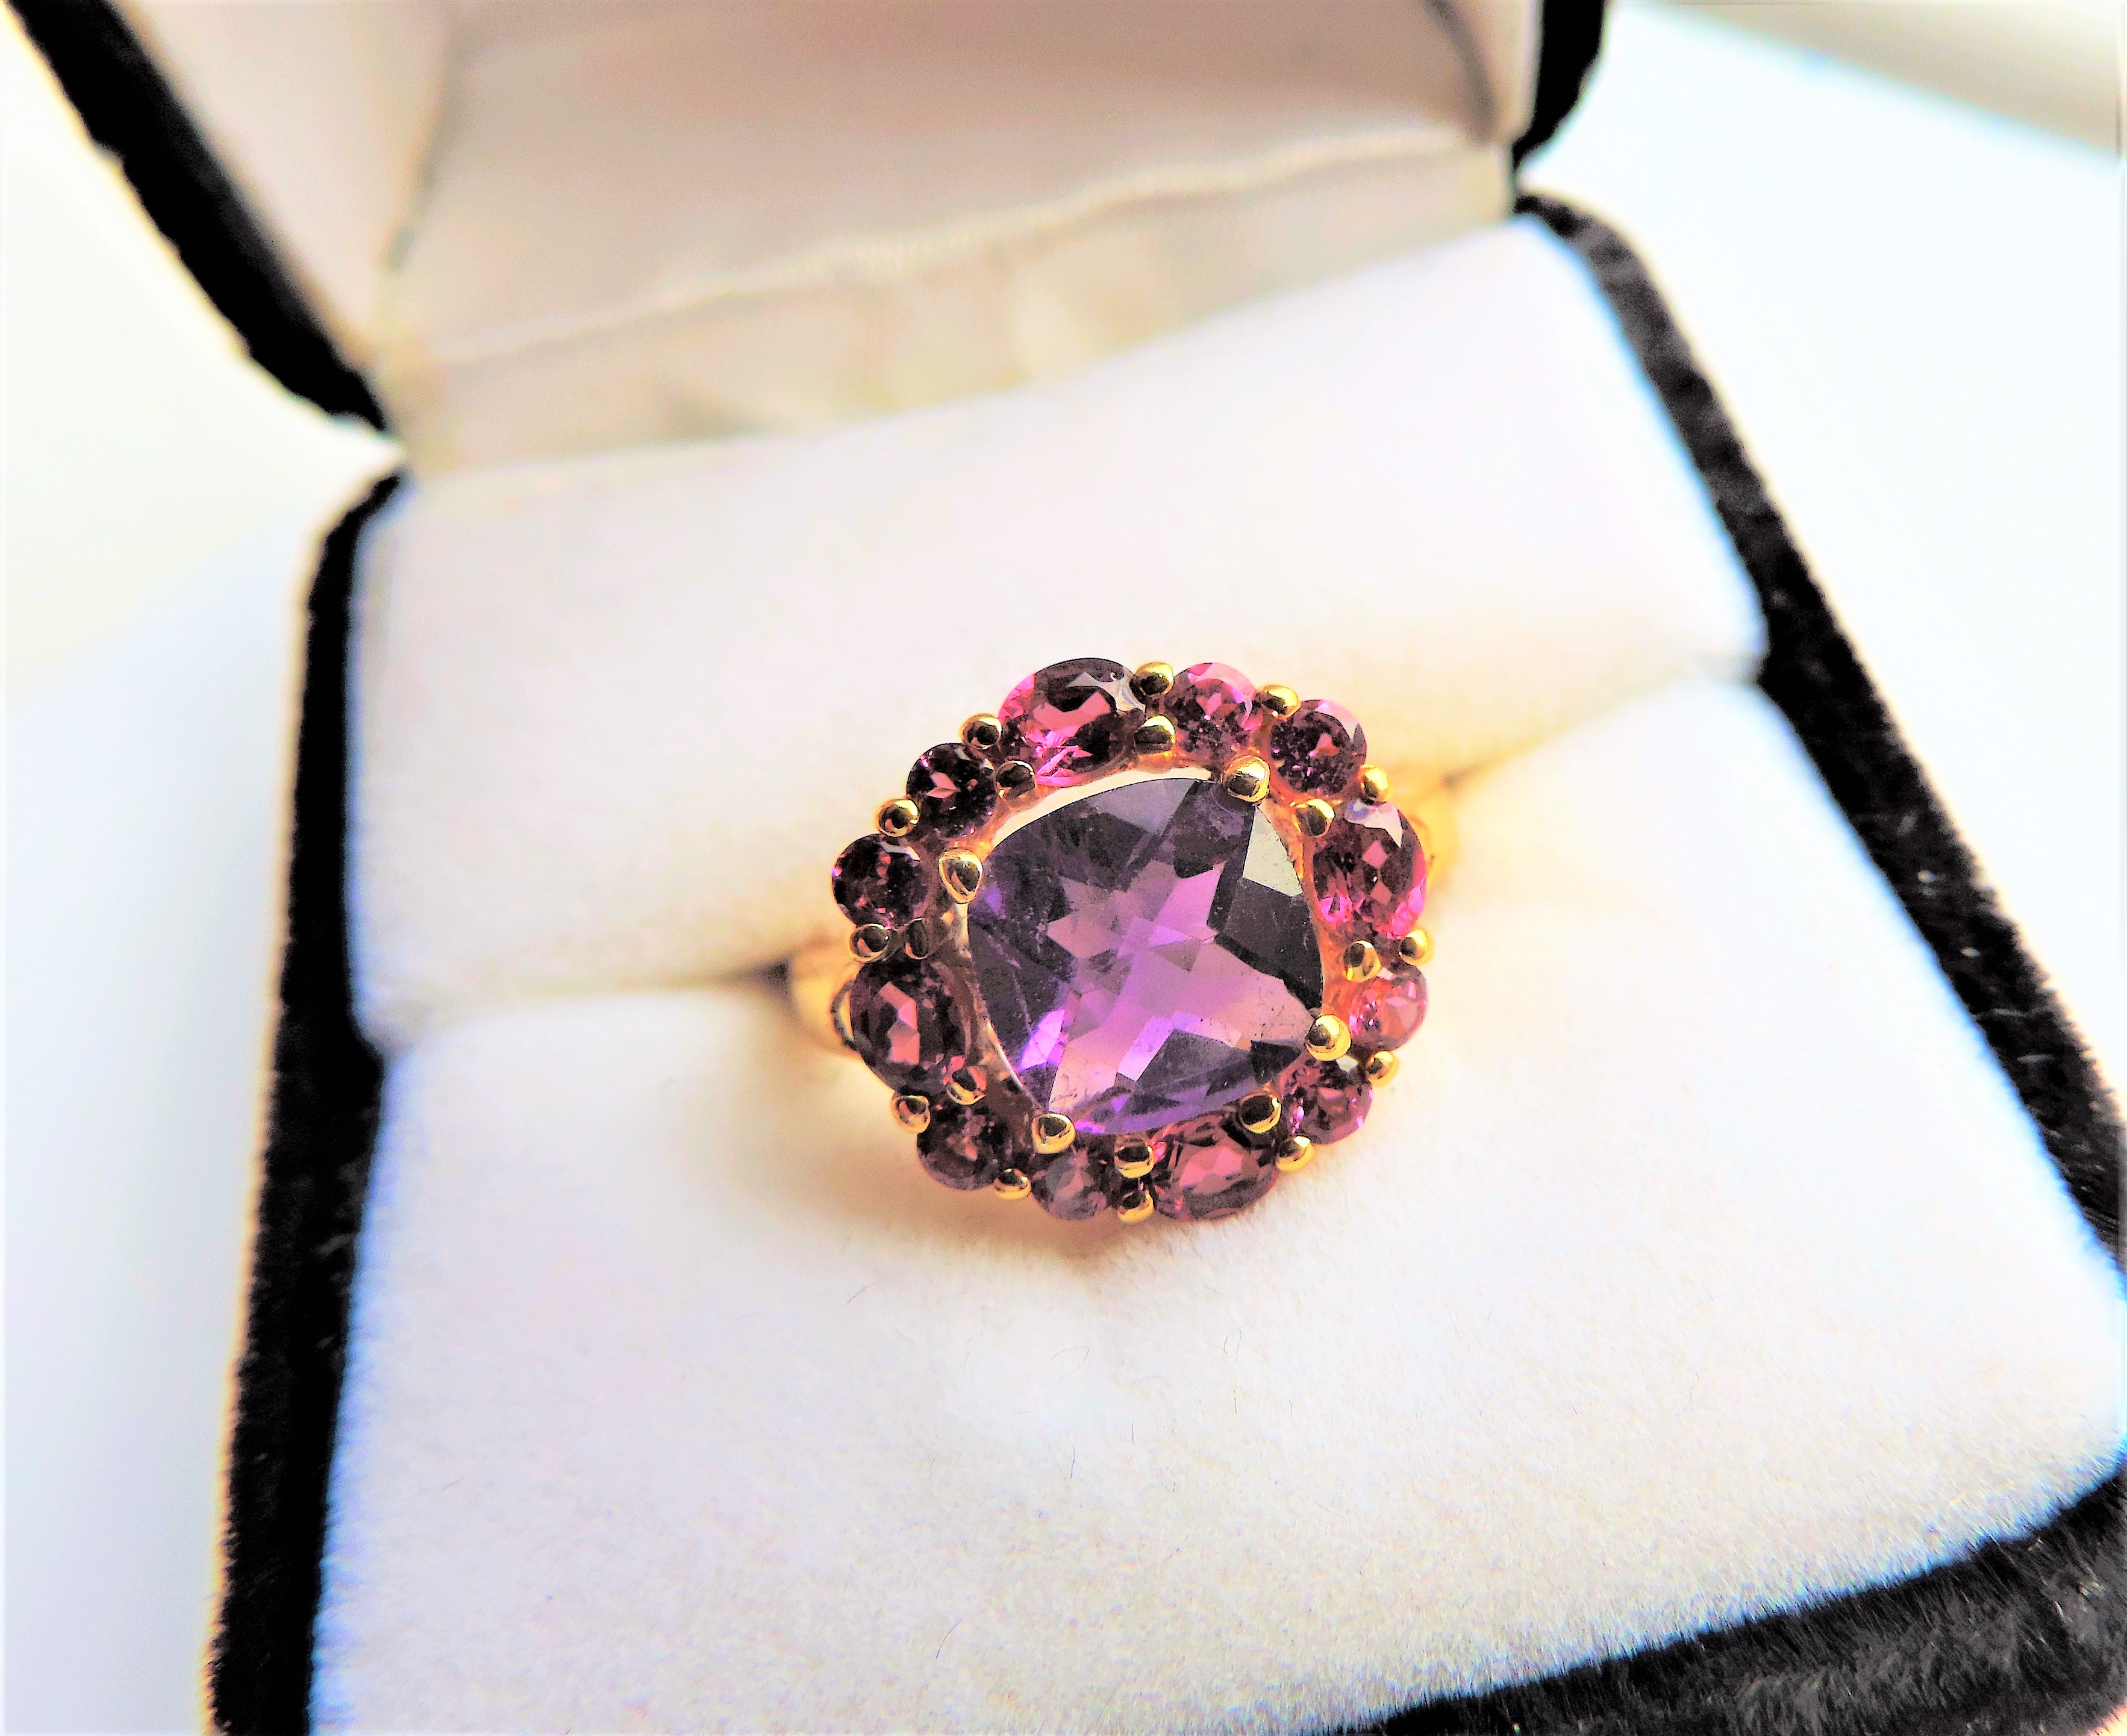 Gold on Sterling Silver 2ct Amethyst & Pink Tourmaline Ring - Image 4 of 4